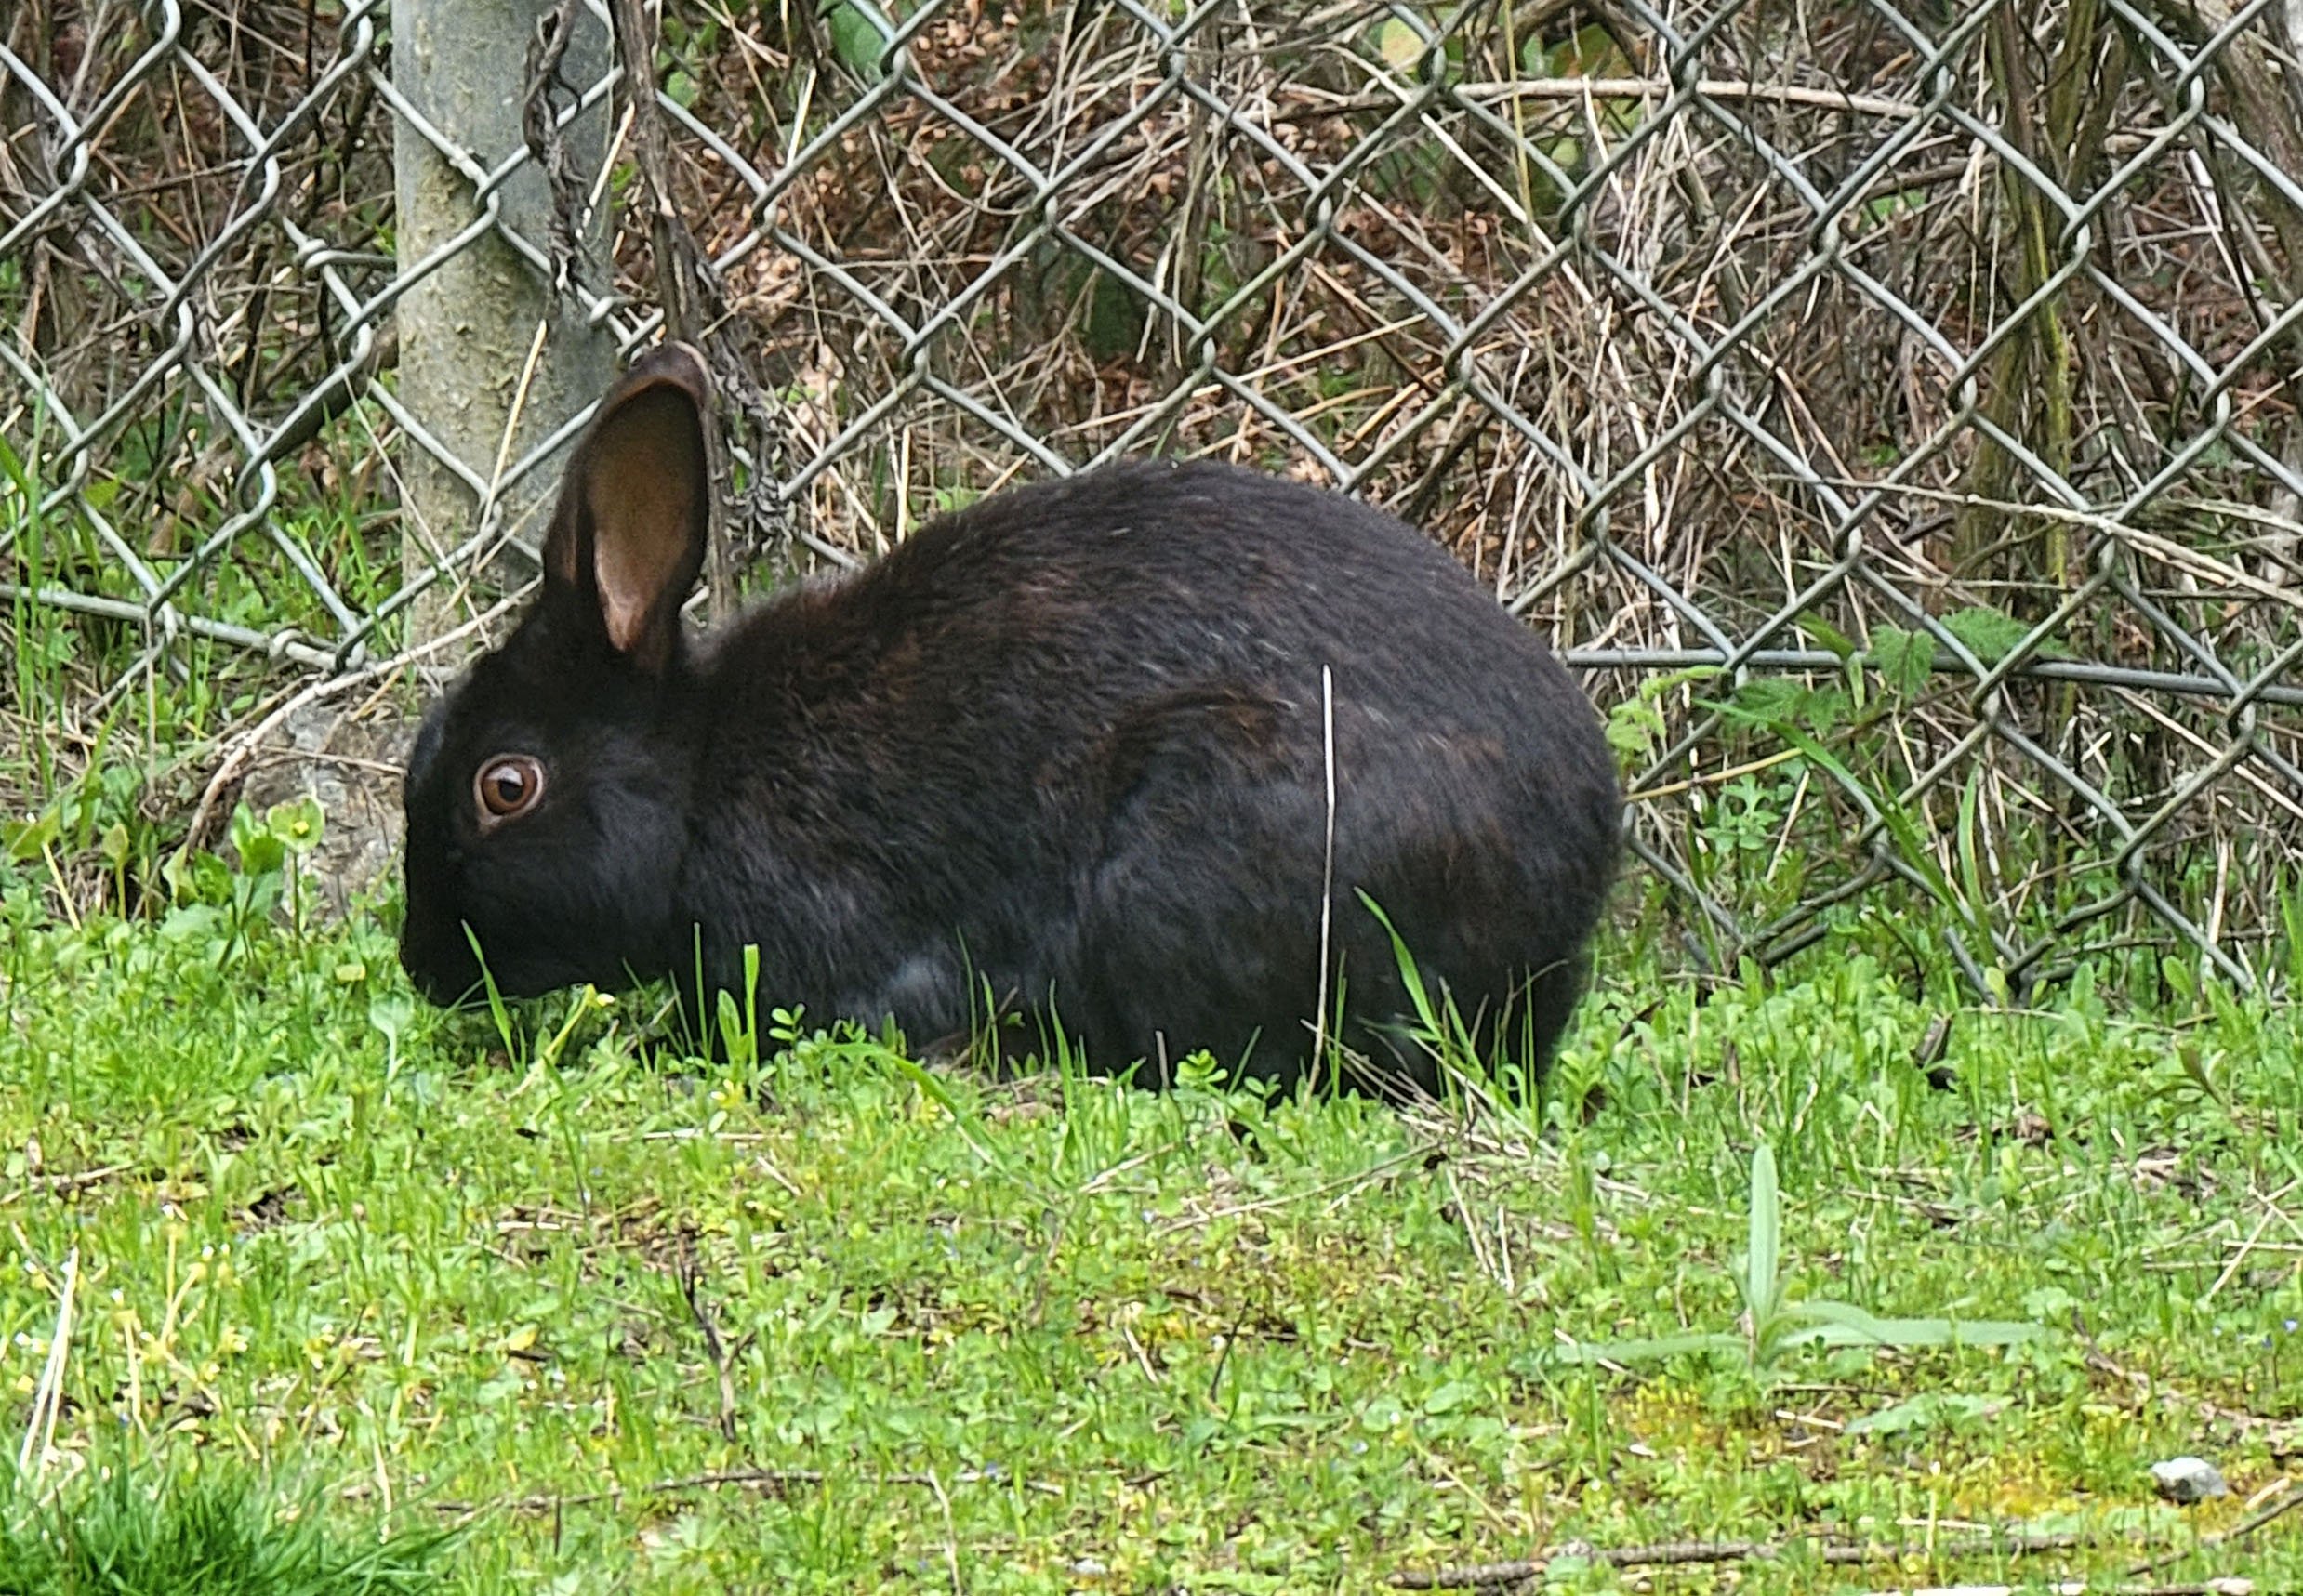 There's bunch of these black bunnies who escaped into the wild and now populate the peninsula. 